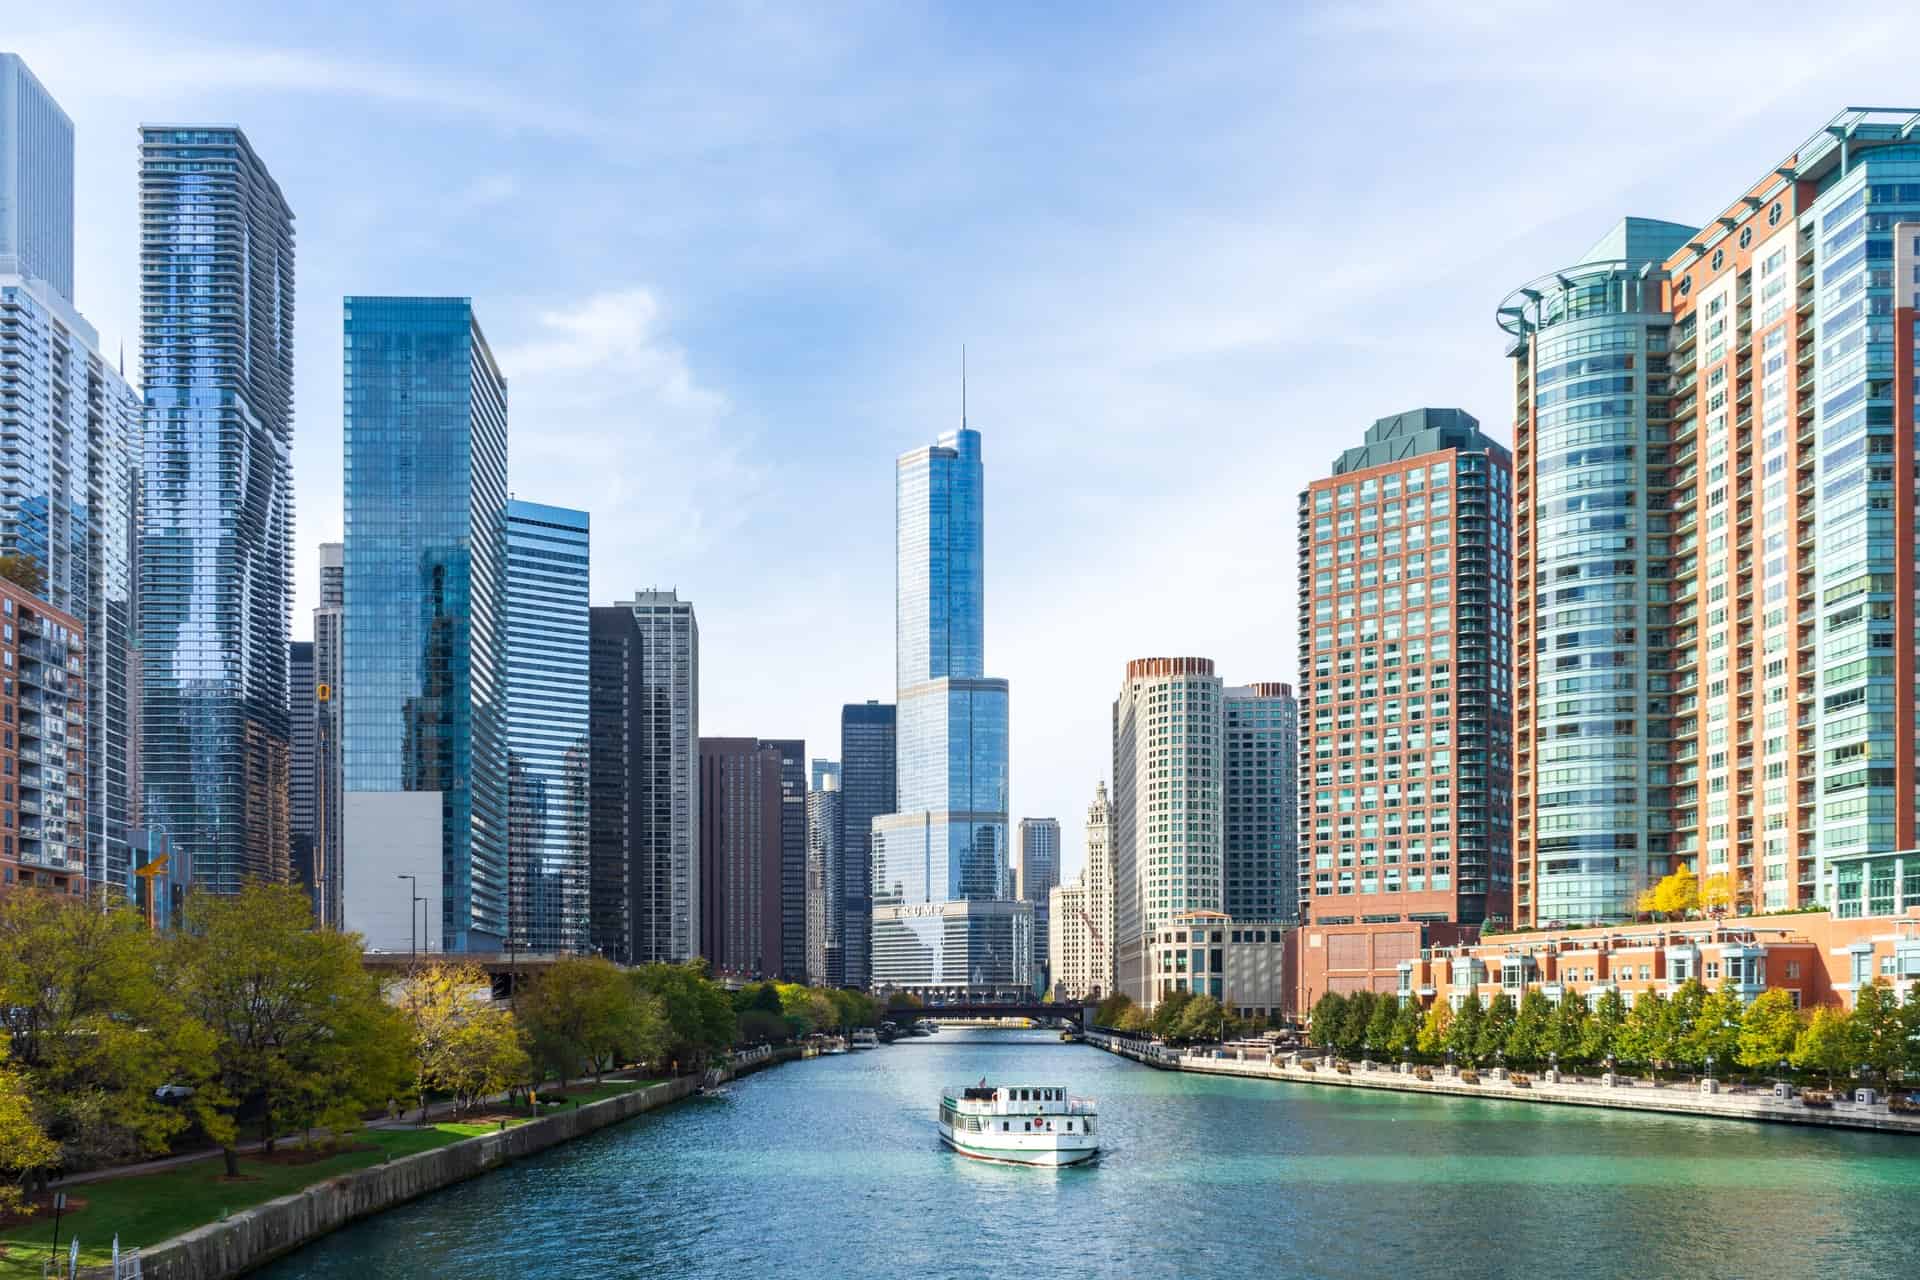 Best things to do in Chicago Illinois - Bethany Bayless - Architectural Boat Tour by Dimitry Anikin on Unsplash